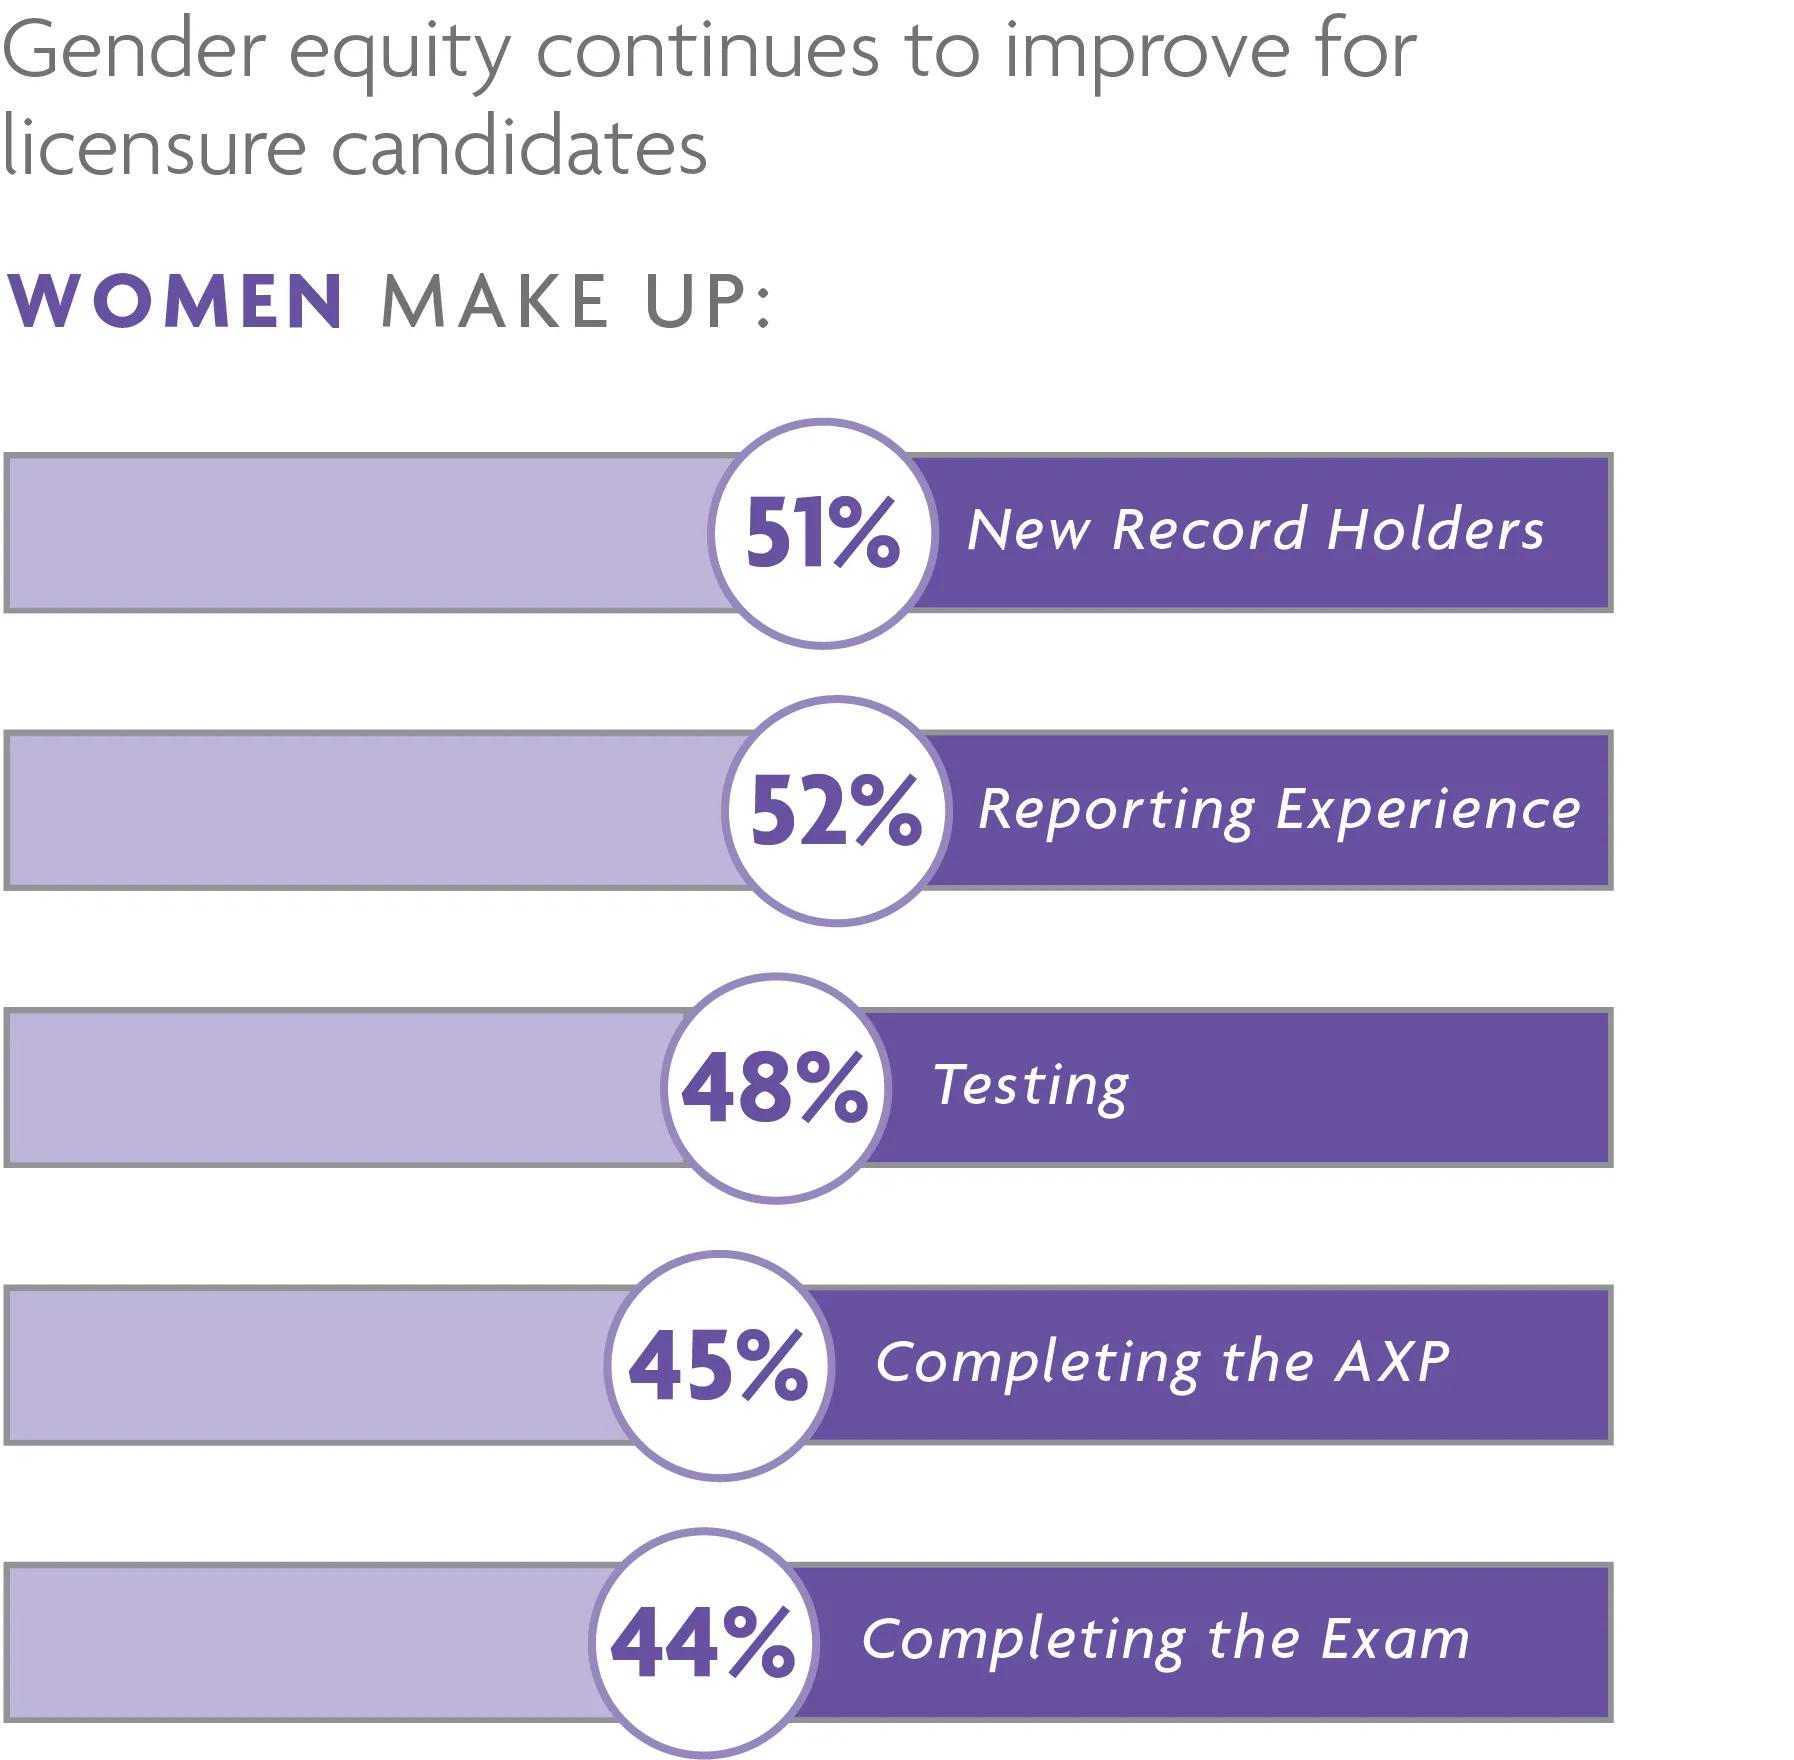 Women have reached gender parity in the pools of candidates reporting experience and starting the path to licensure. For help with data accessibility, contact communications@ncarb.org.